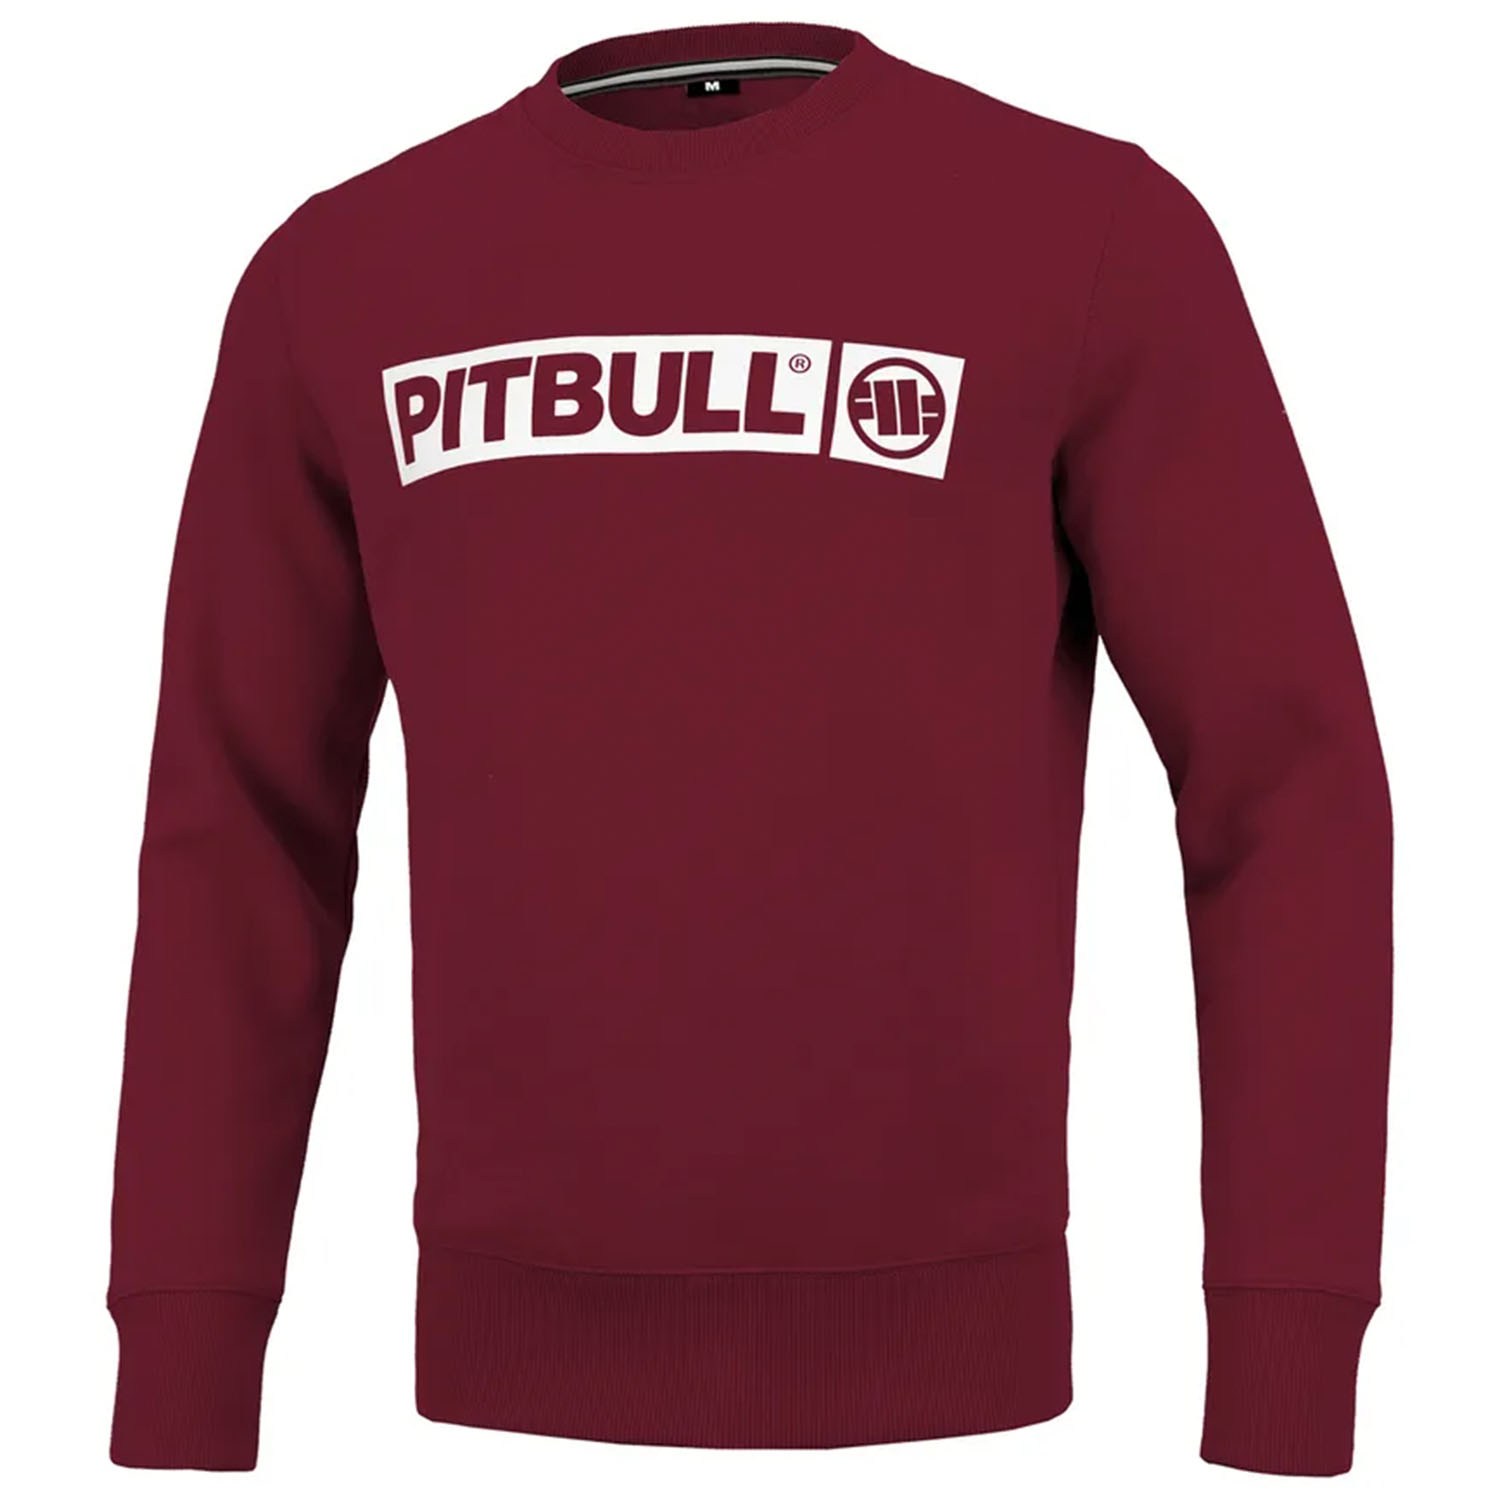 Pit Bull West Coast Pullover, Terry Hilltop, wine red